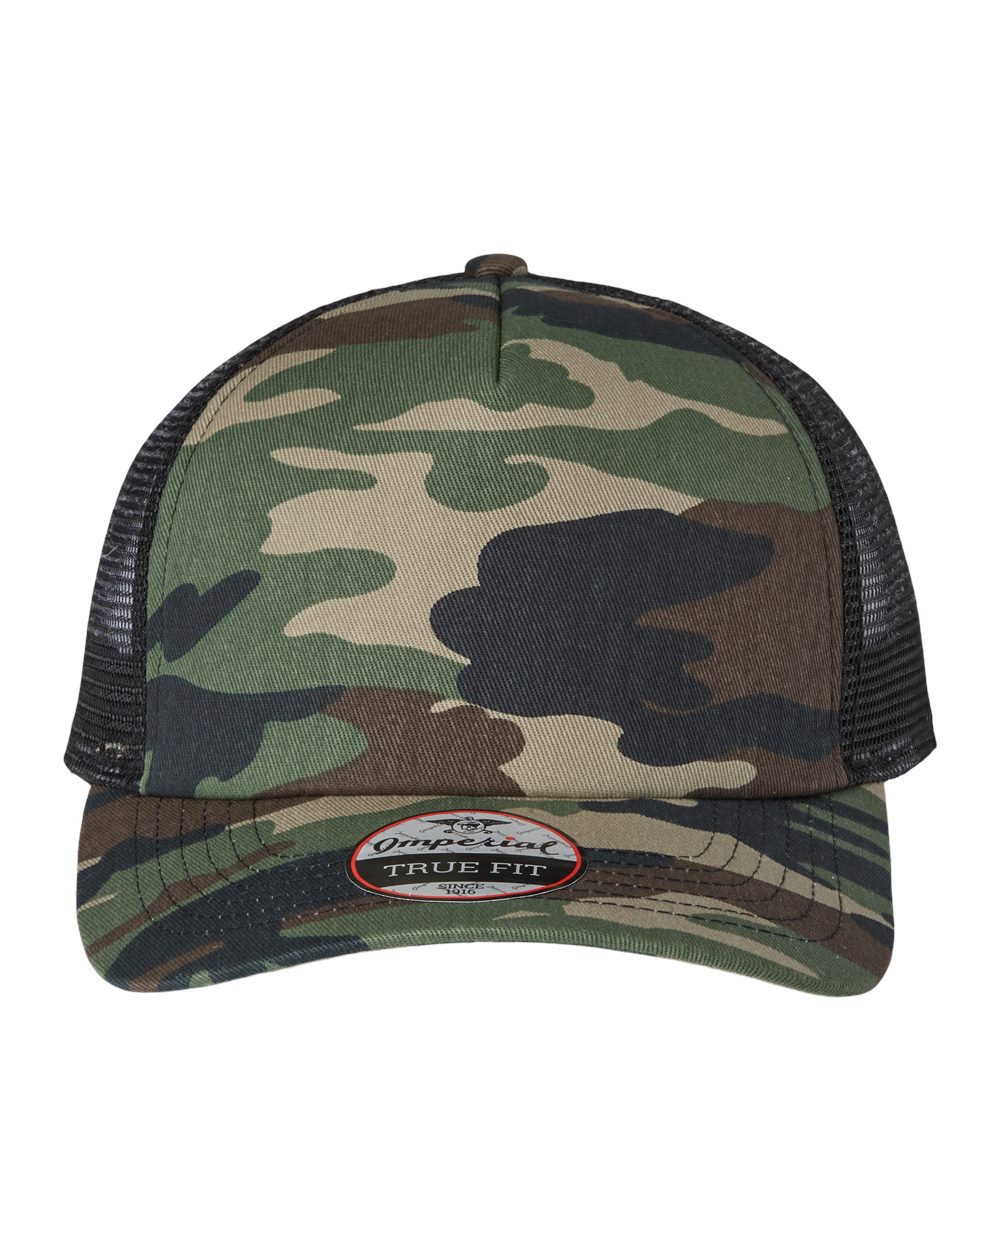 Imperial 1287 - North Country Trucker Cap